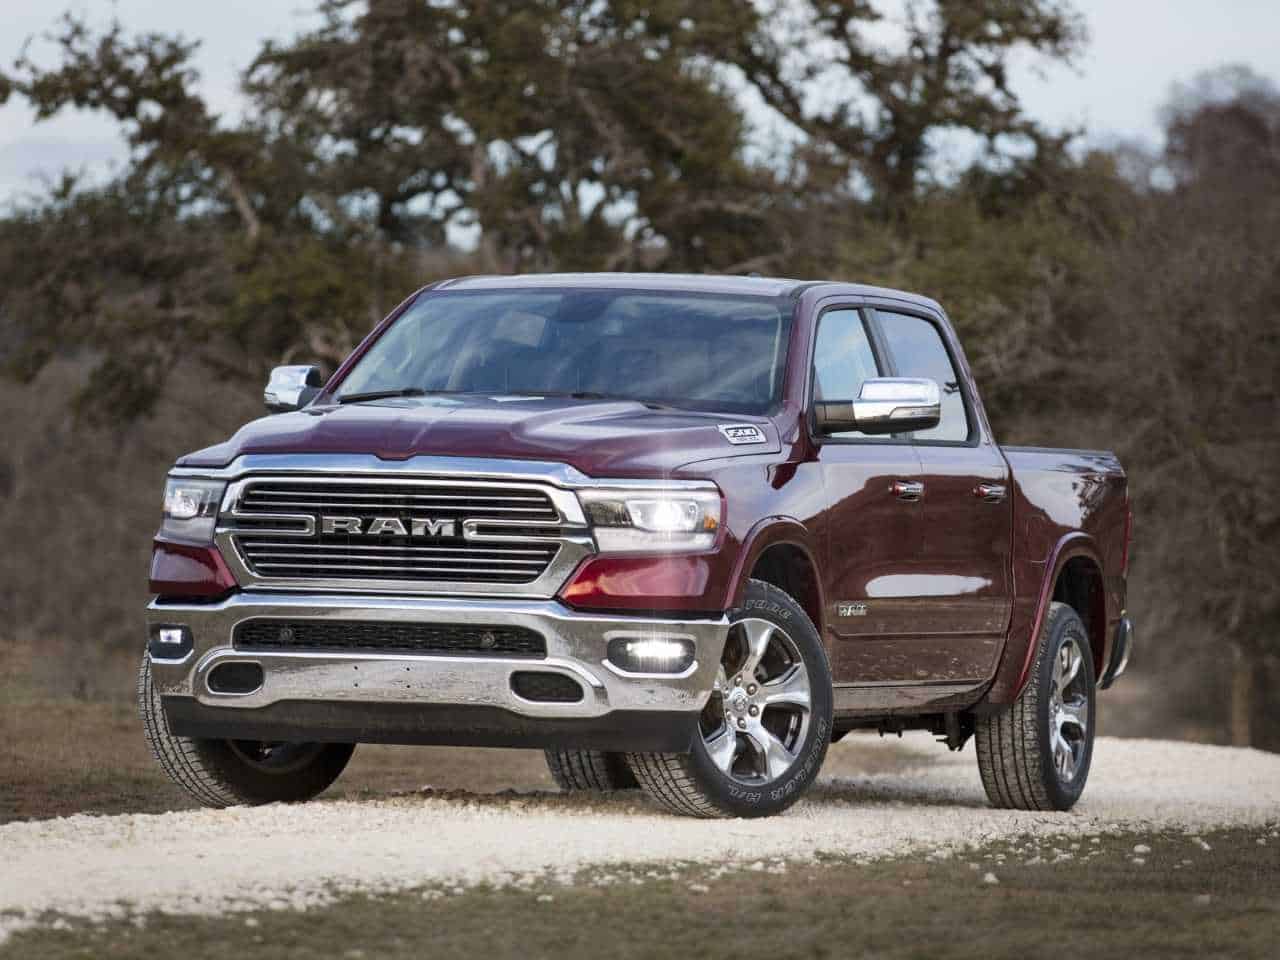 Which Ram Truck is the Most Luxurious? Is Ram a luxury brand?